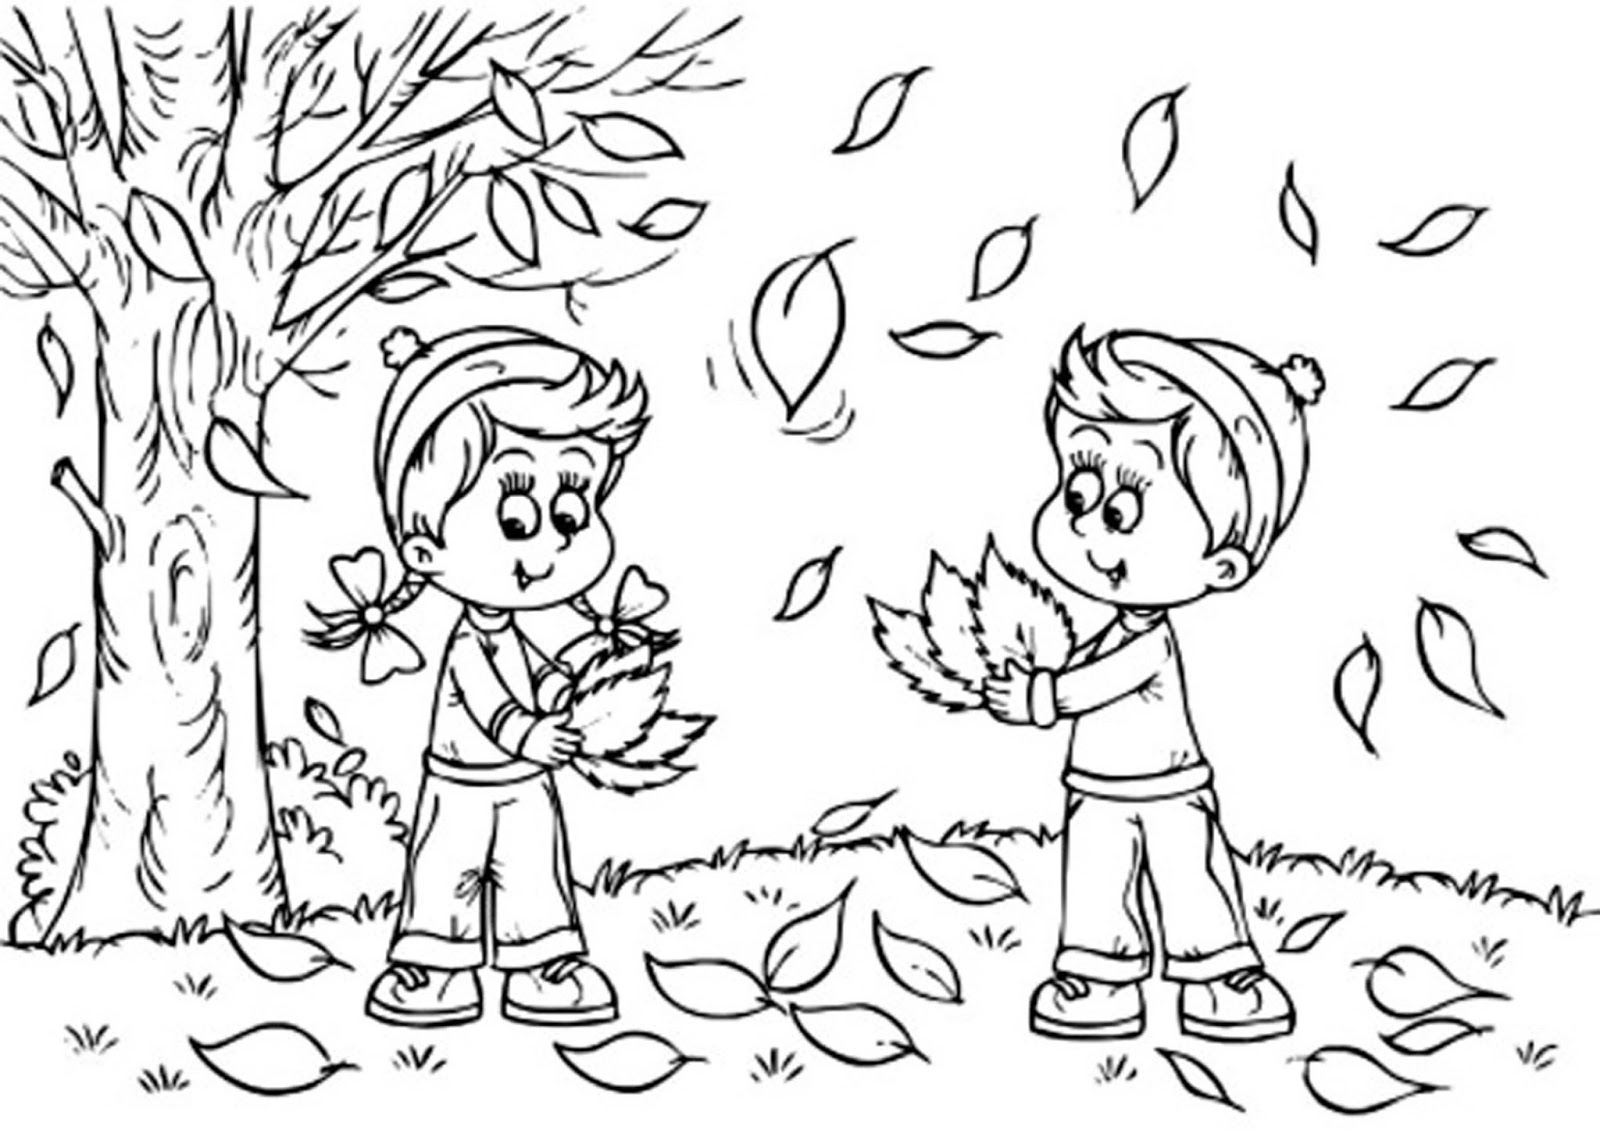 Fall Leaves Coloring Pages 2016 Coloring Wallpapers Download Free Images Wallpaper [coloring654.blogspot.com]